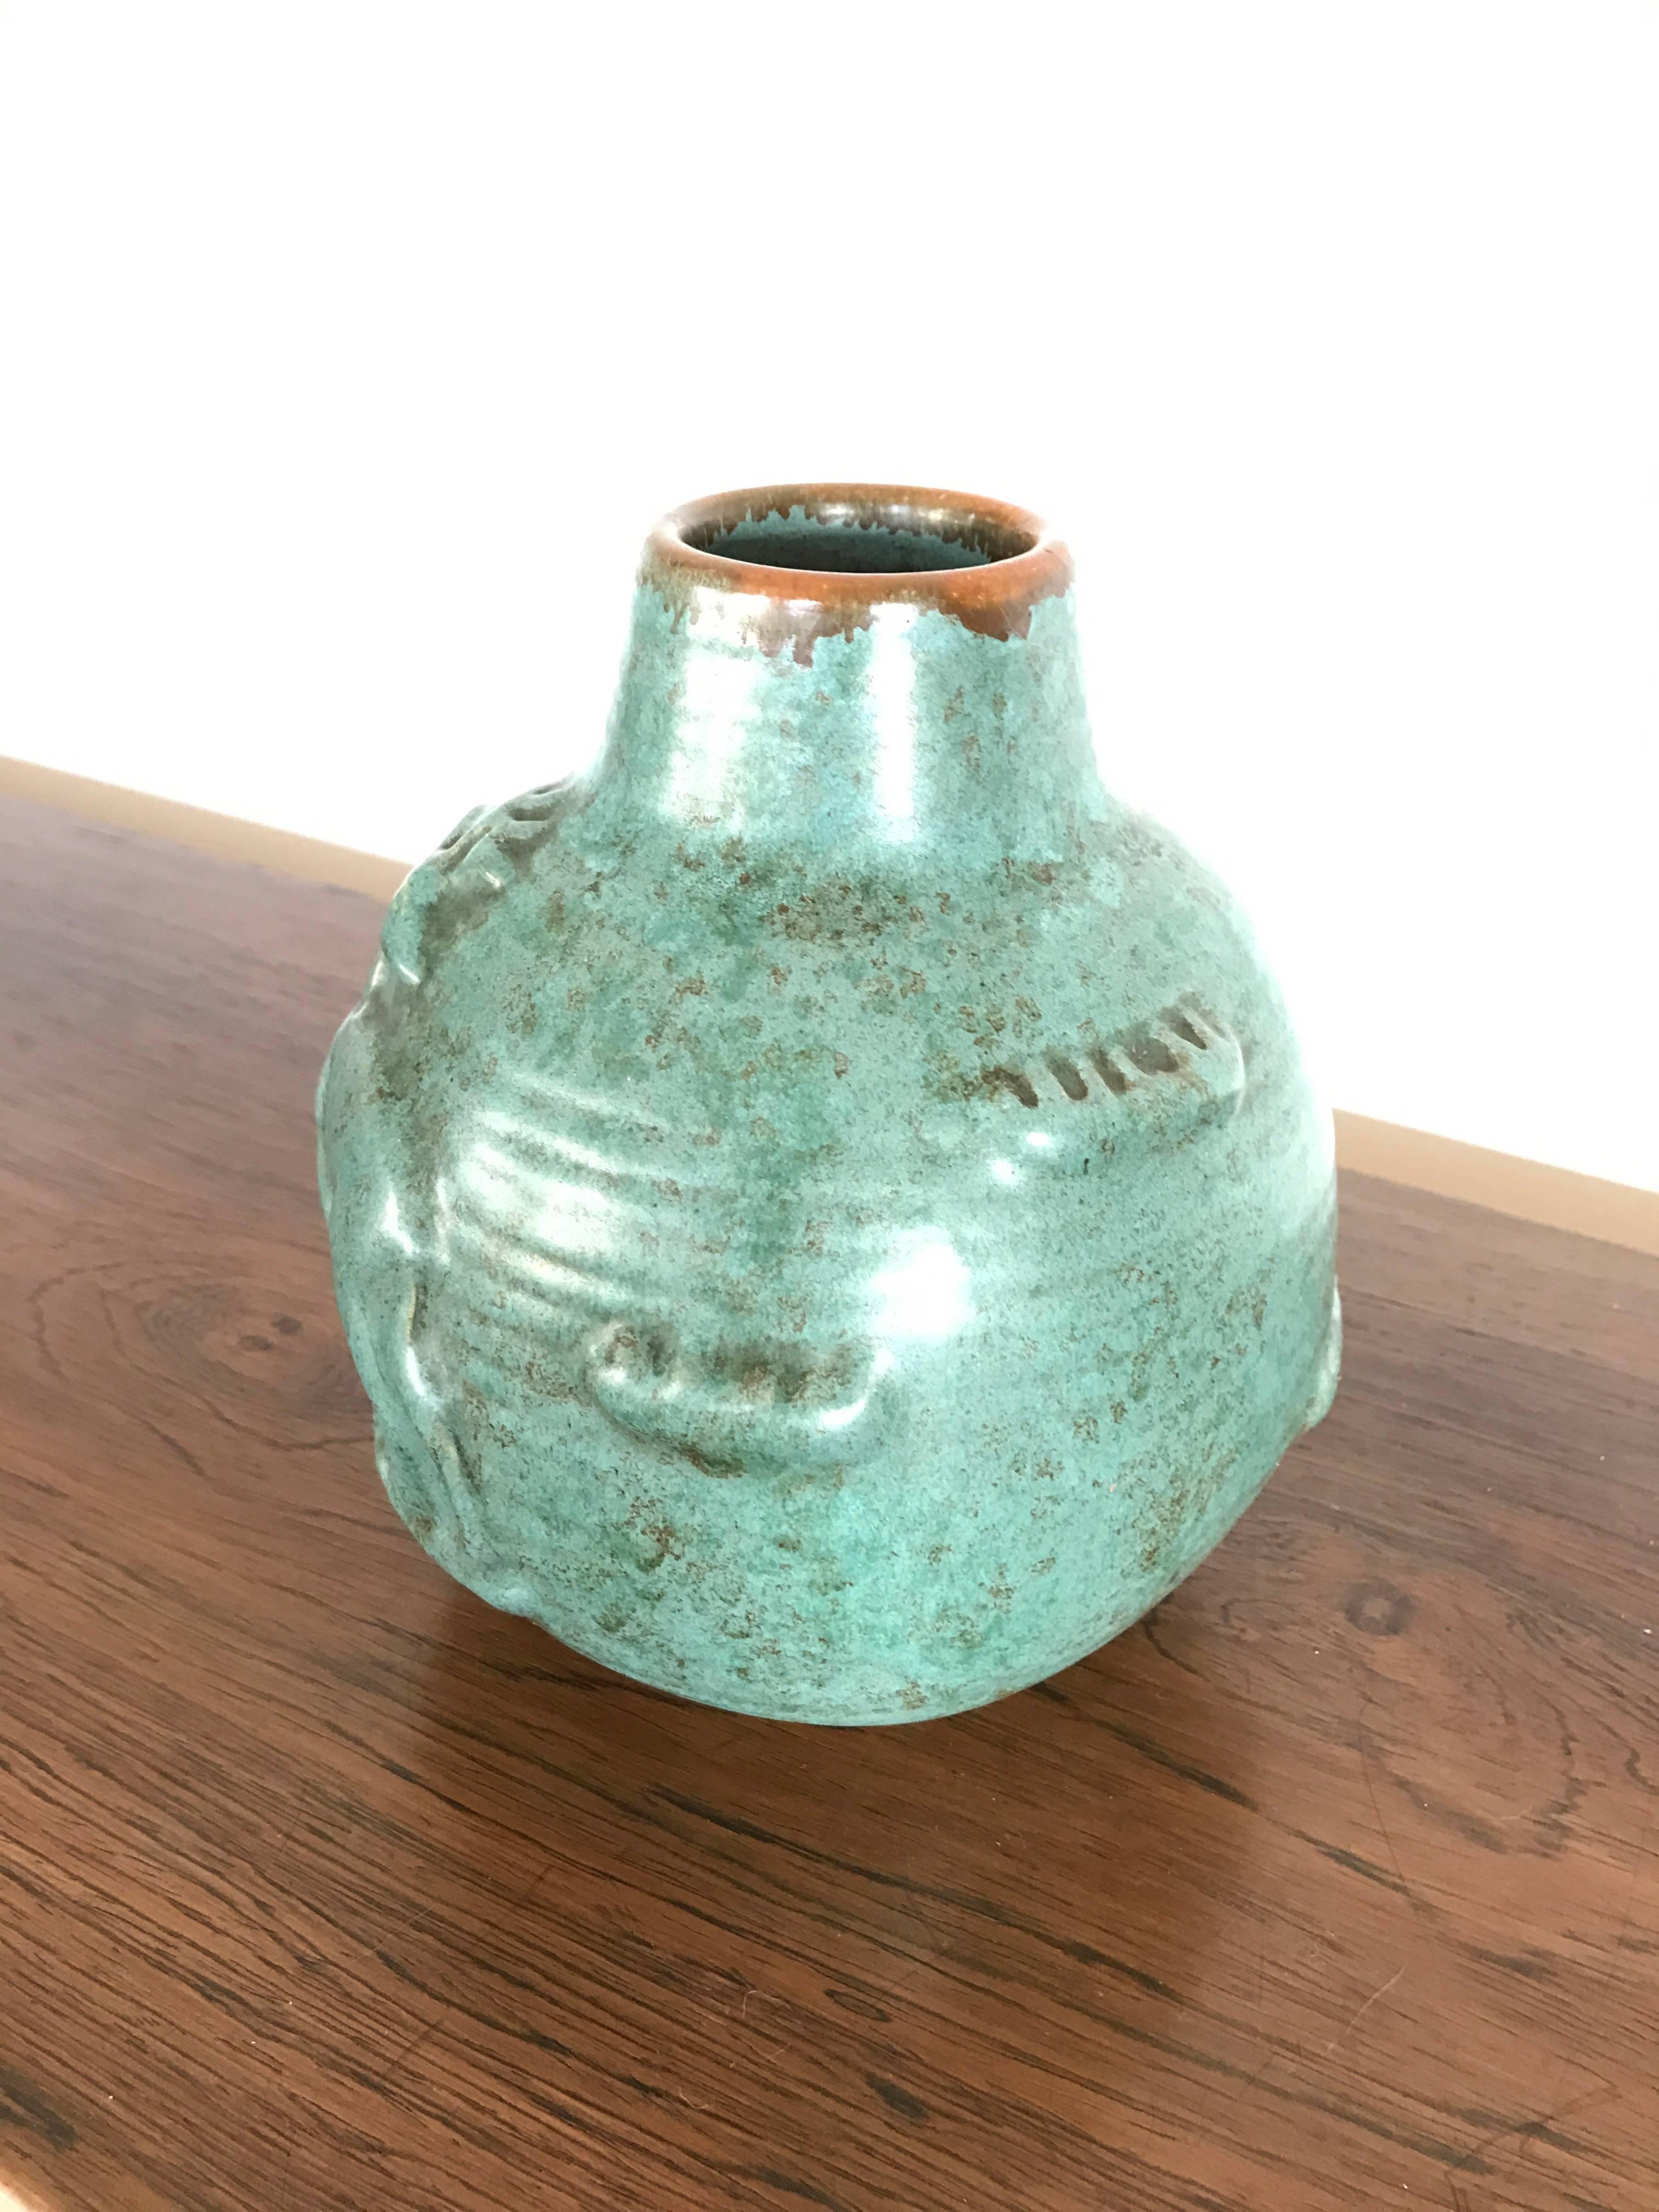 Green glazed stoneware vase, made by Michael Andersen from Denmark in 1930s, and in very good condition.